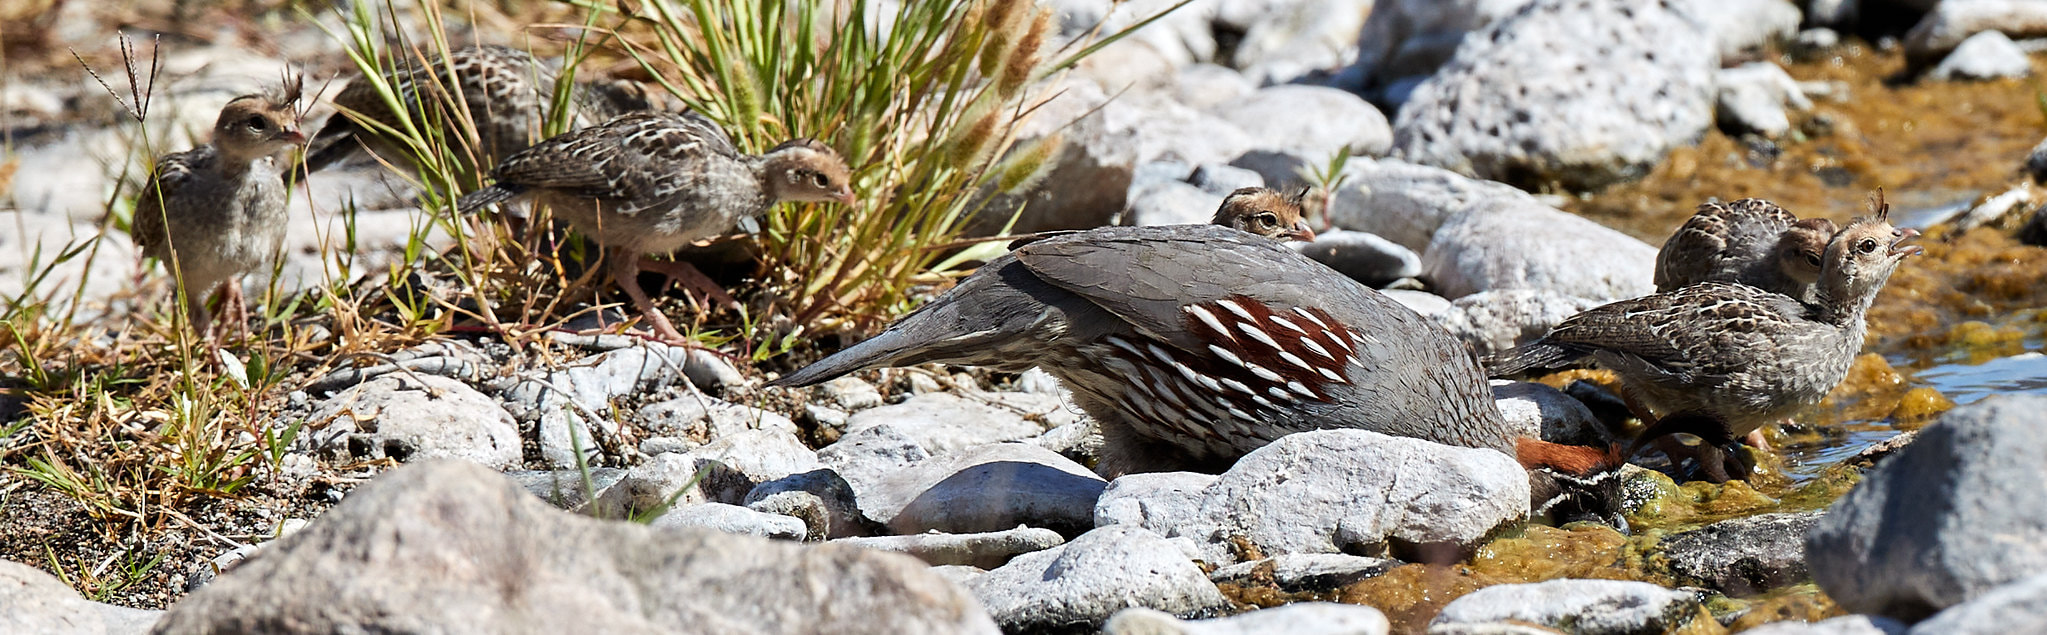 Quail adult and babies